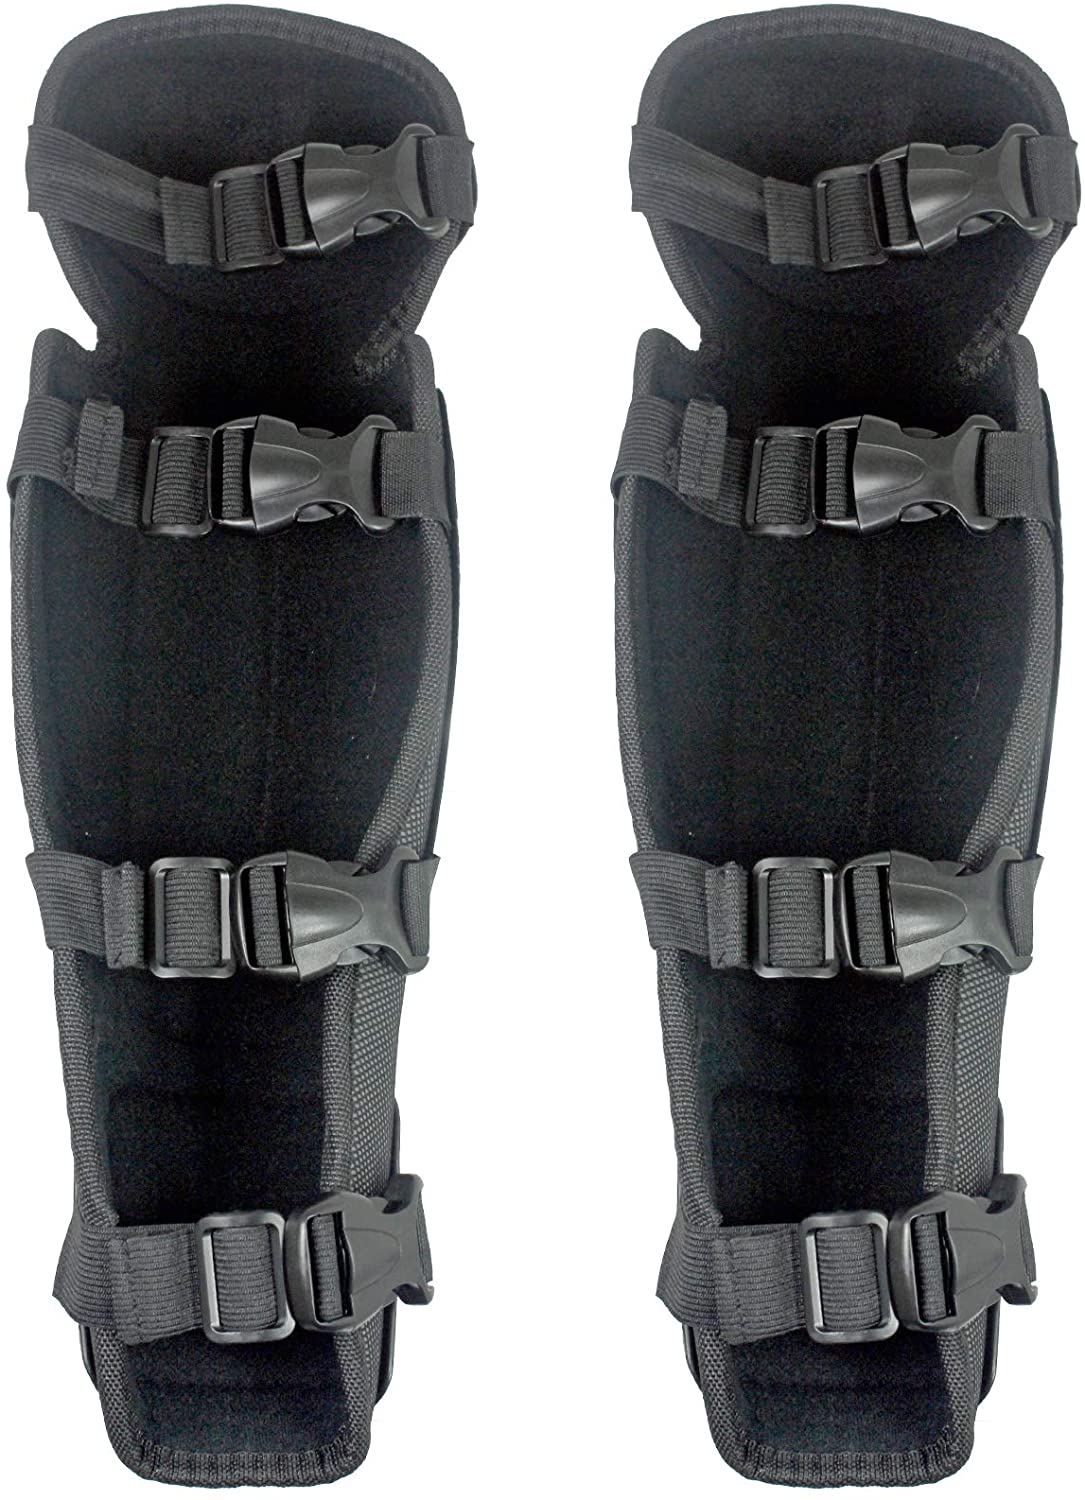 Knee & Shin Guards for Gardening (One Size, Black, 2 Pairs)